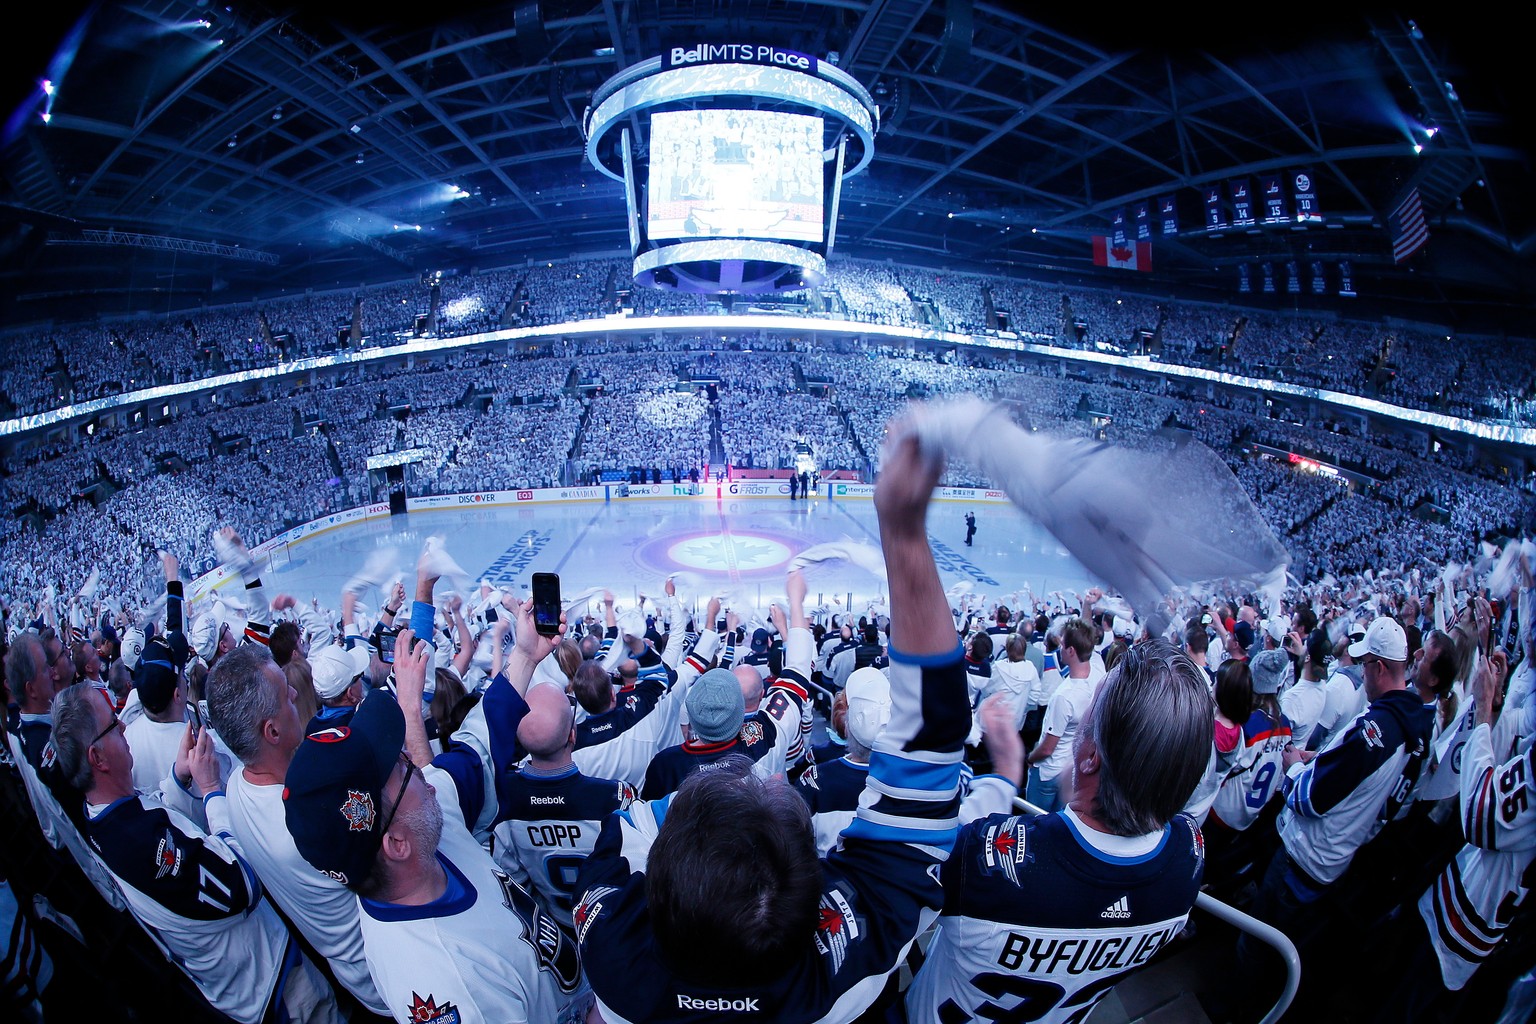 Winnipeg Jets fans cheer as the team hits the ice for Game 2 of an NHL hockey first-round playoff series against the Minnesota Wild on Friday, April 13, 2018, in Winnipeg, Manitoba. (John Woods/The Ca ...